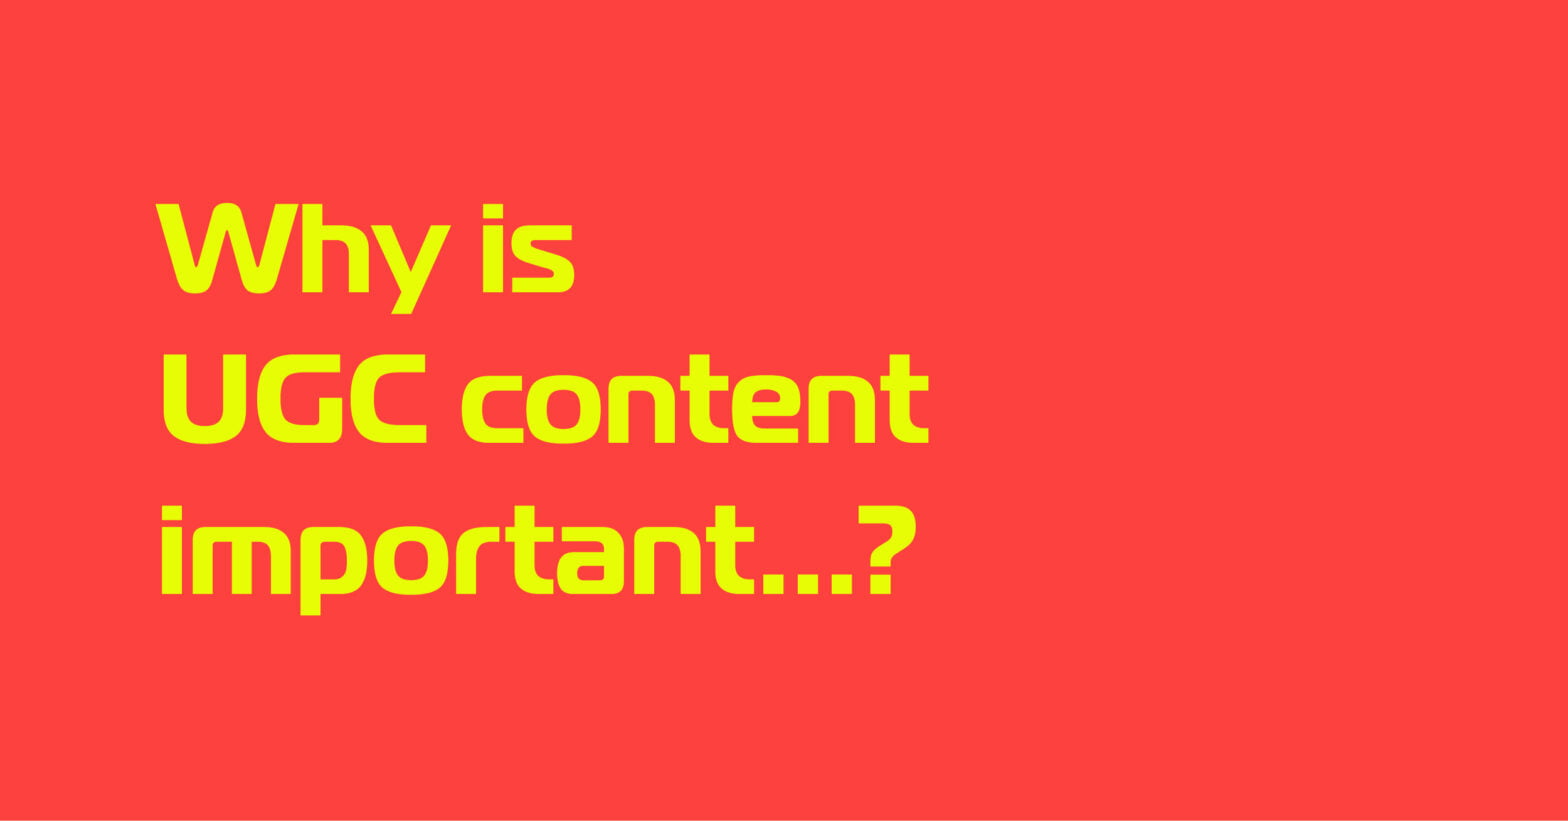 WHY IS UGC CONTENT IMPORTANT 01 01